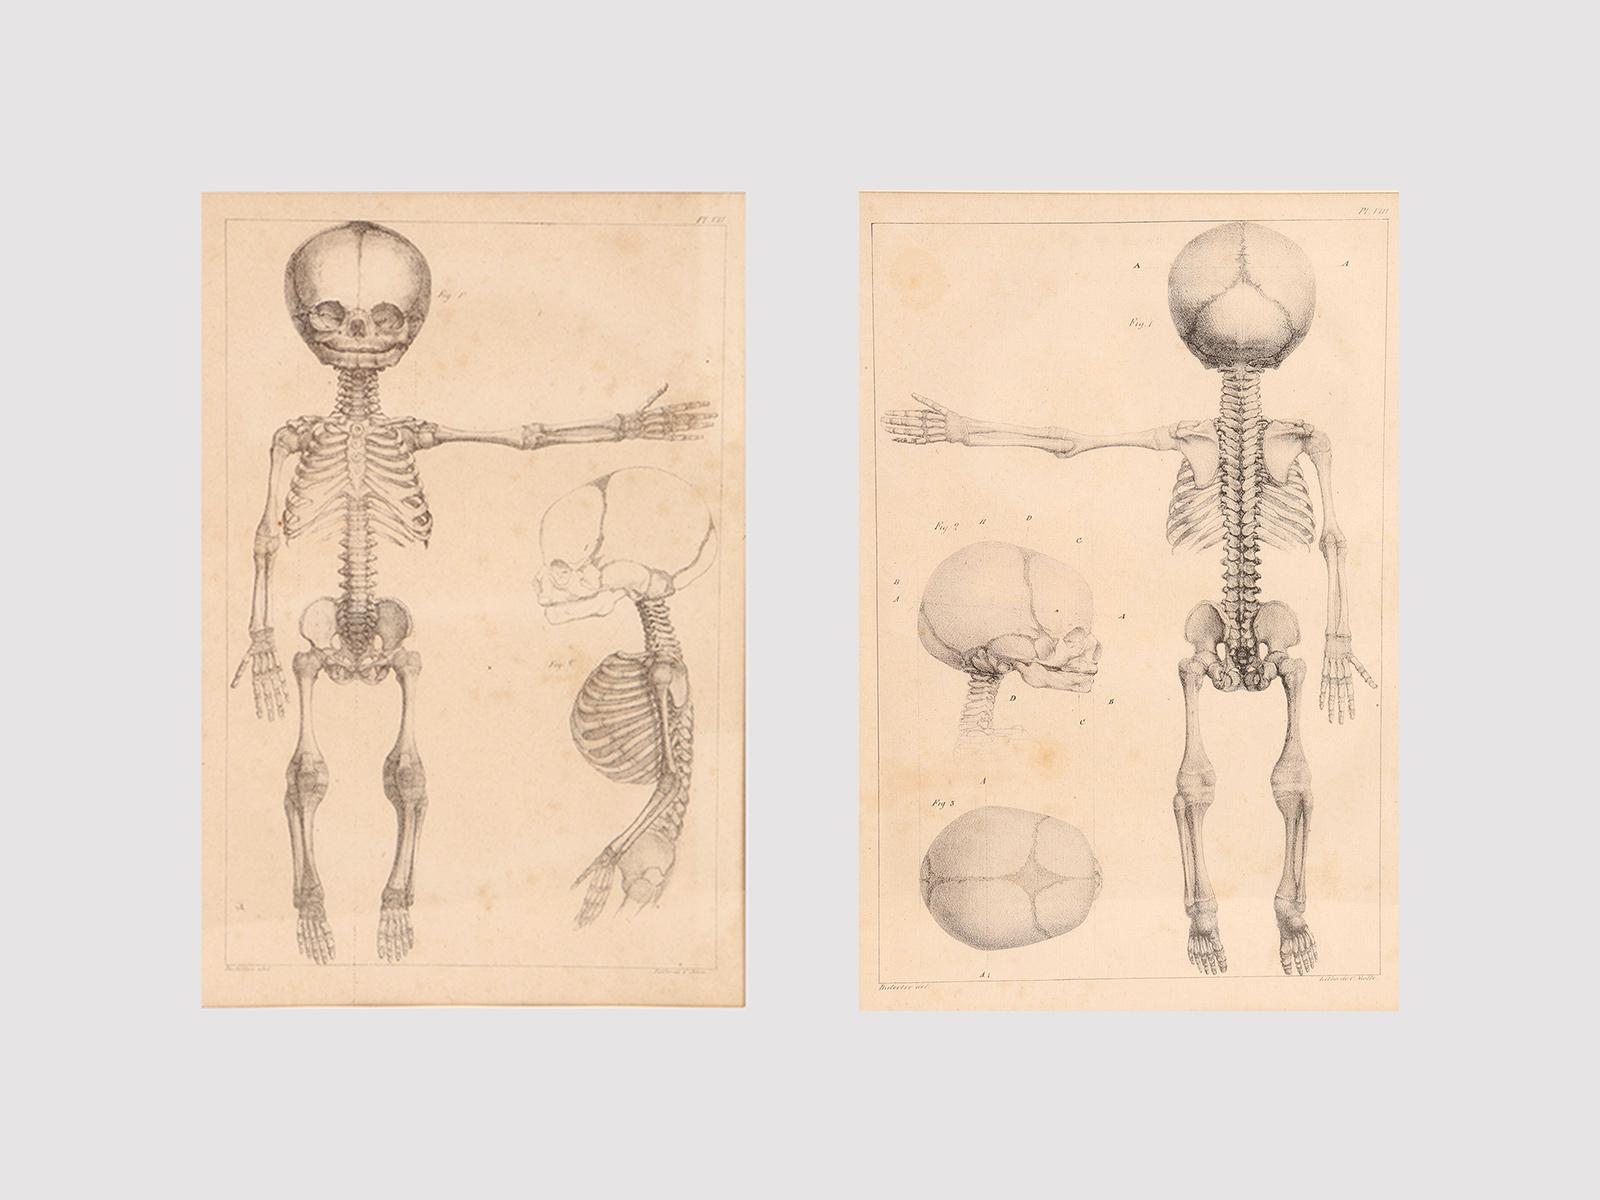 A rare couple of French anatomical lithographs of the fetus skeleton, in a vintage metal frame. Great quality and artistic composition. 
Printed by Charles Motte. Paris early19th century.